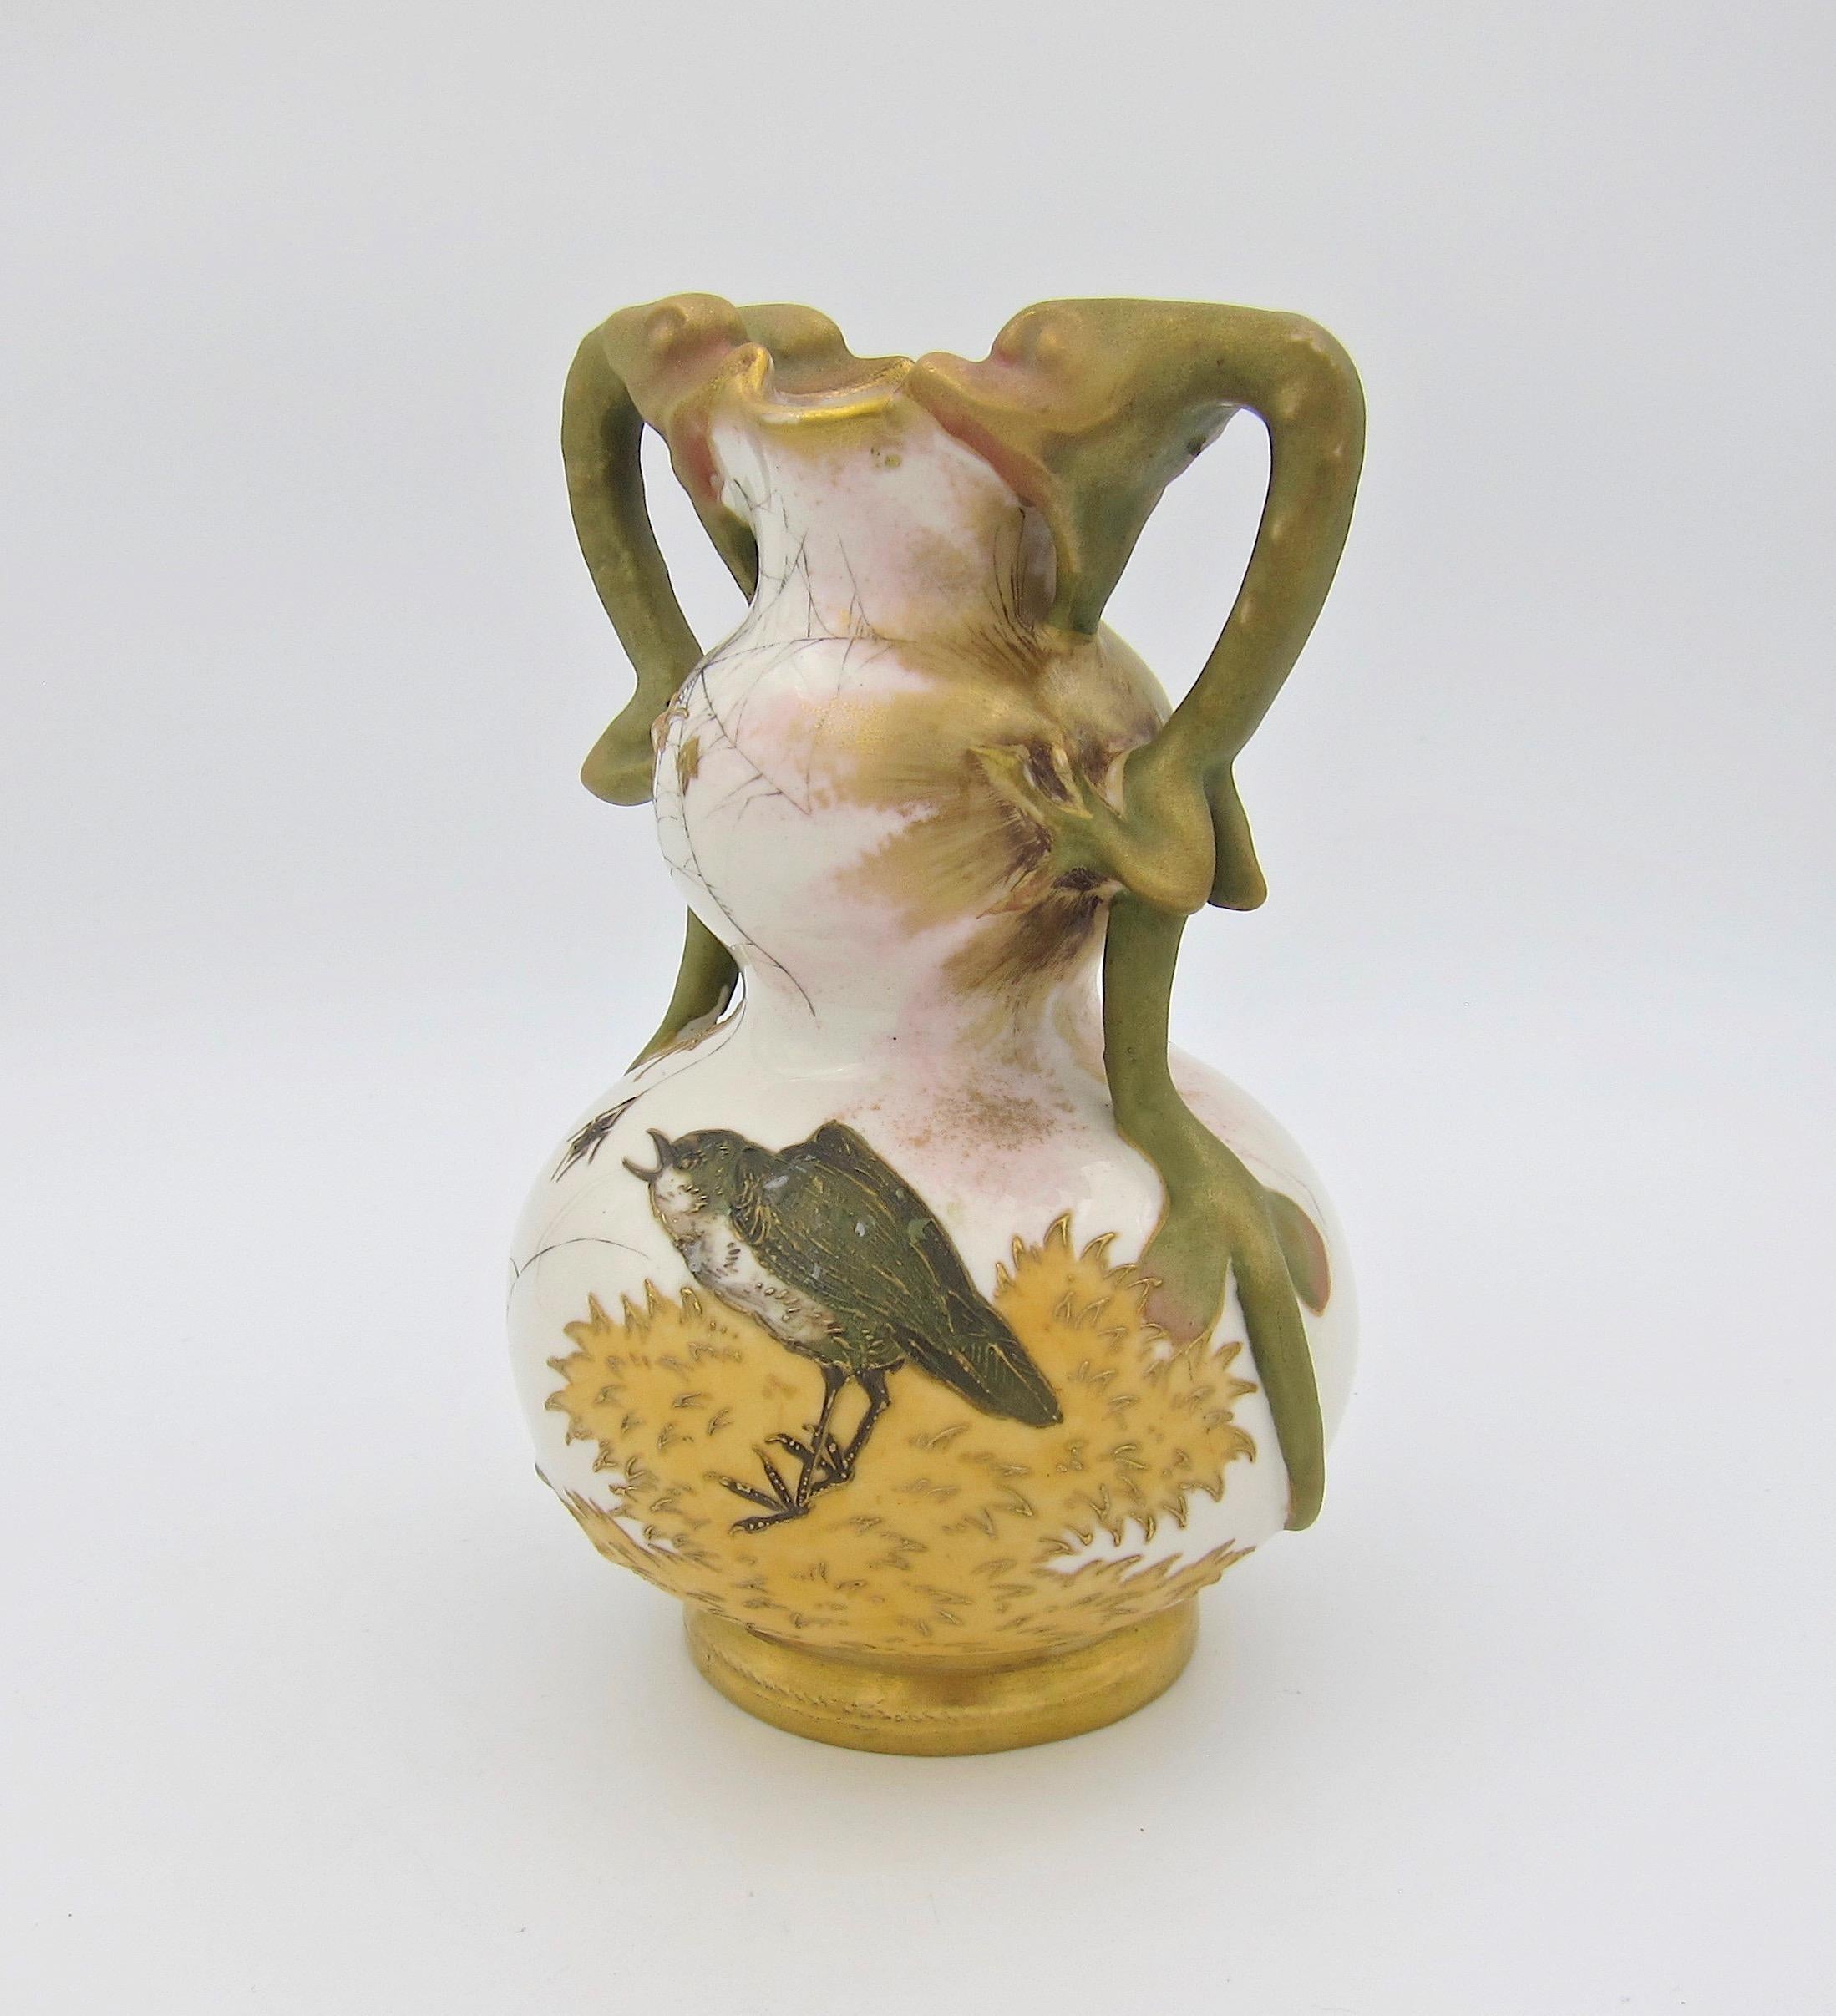 An antique Austrian vase of ivory porcelain by Riessner, Stellmacher & Kessel (RStK) Amphora of Turn-Teplitz, Bohemia (Austria) dating between 1899 and 1900. The vase has two dragon-shaped handles, gilt accents, and hand-painted decor featuring a